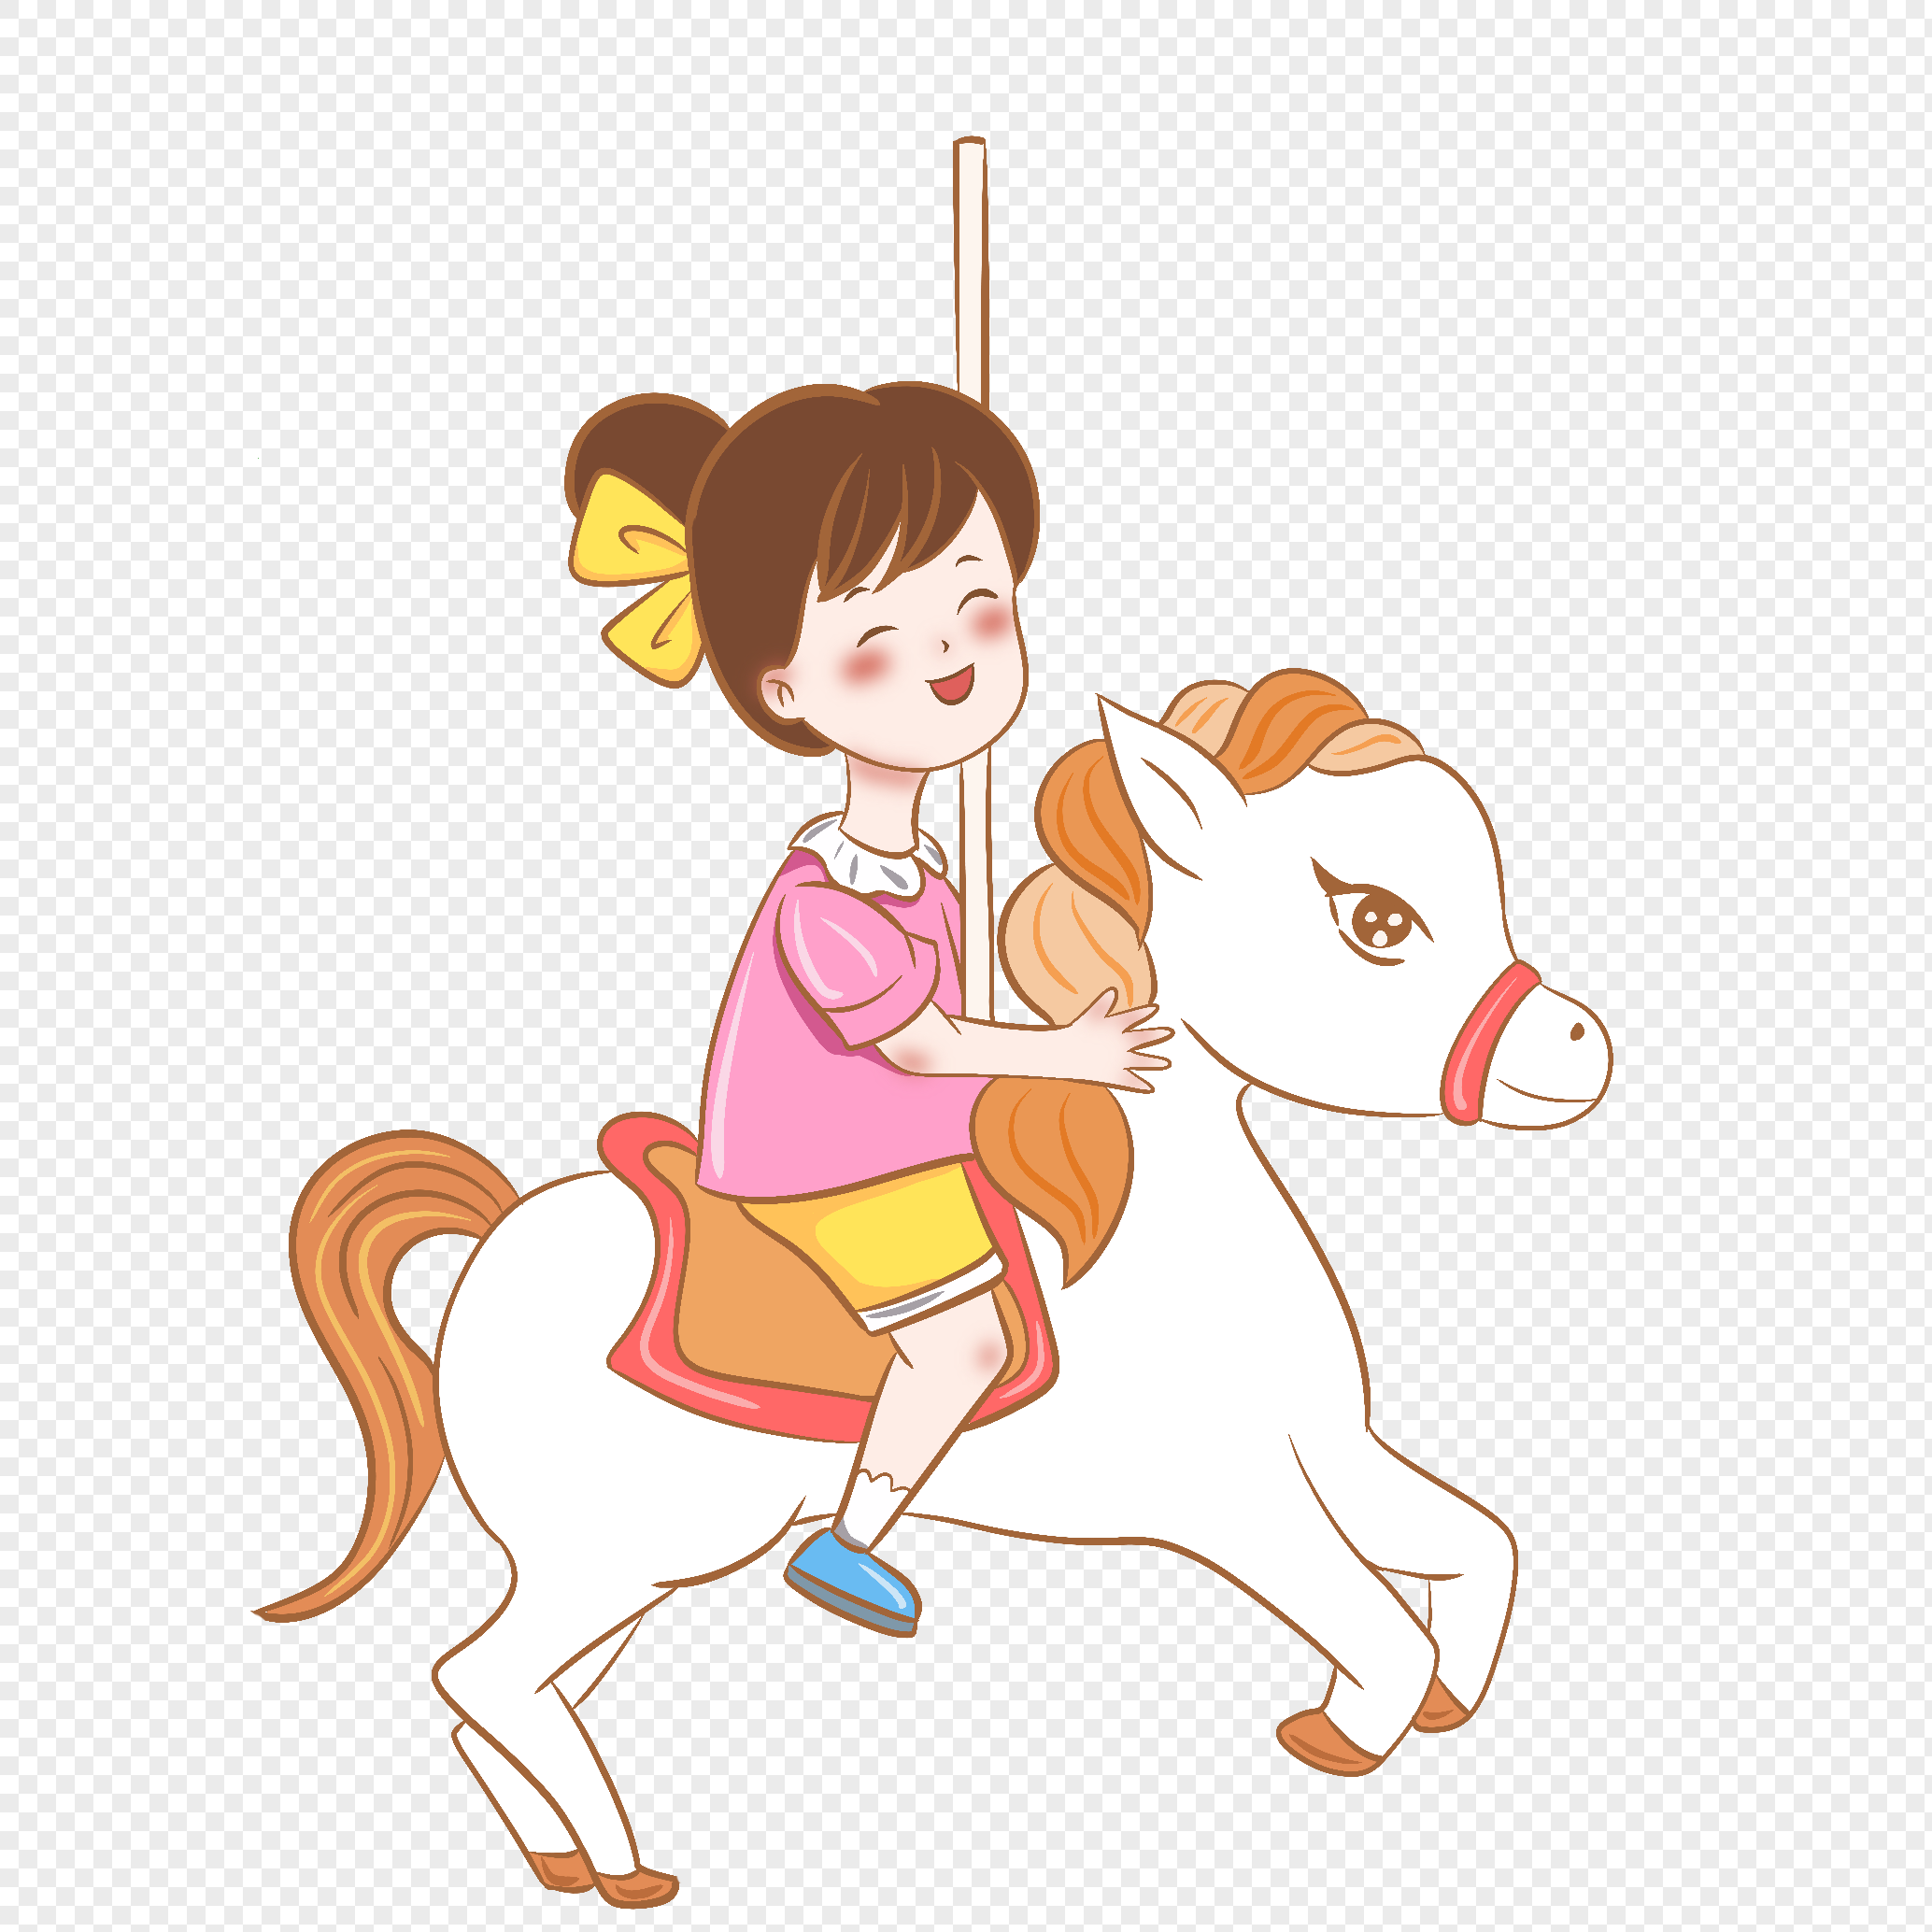 Circus Horse PNG Images With Transparent Background | Free ...